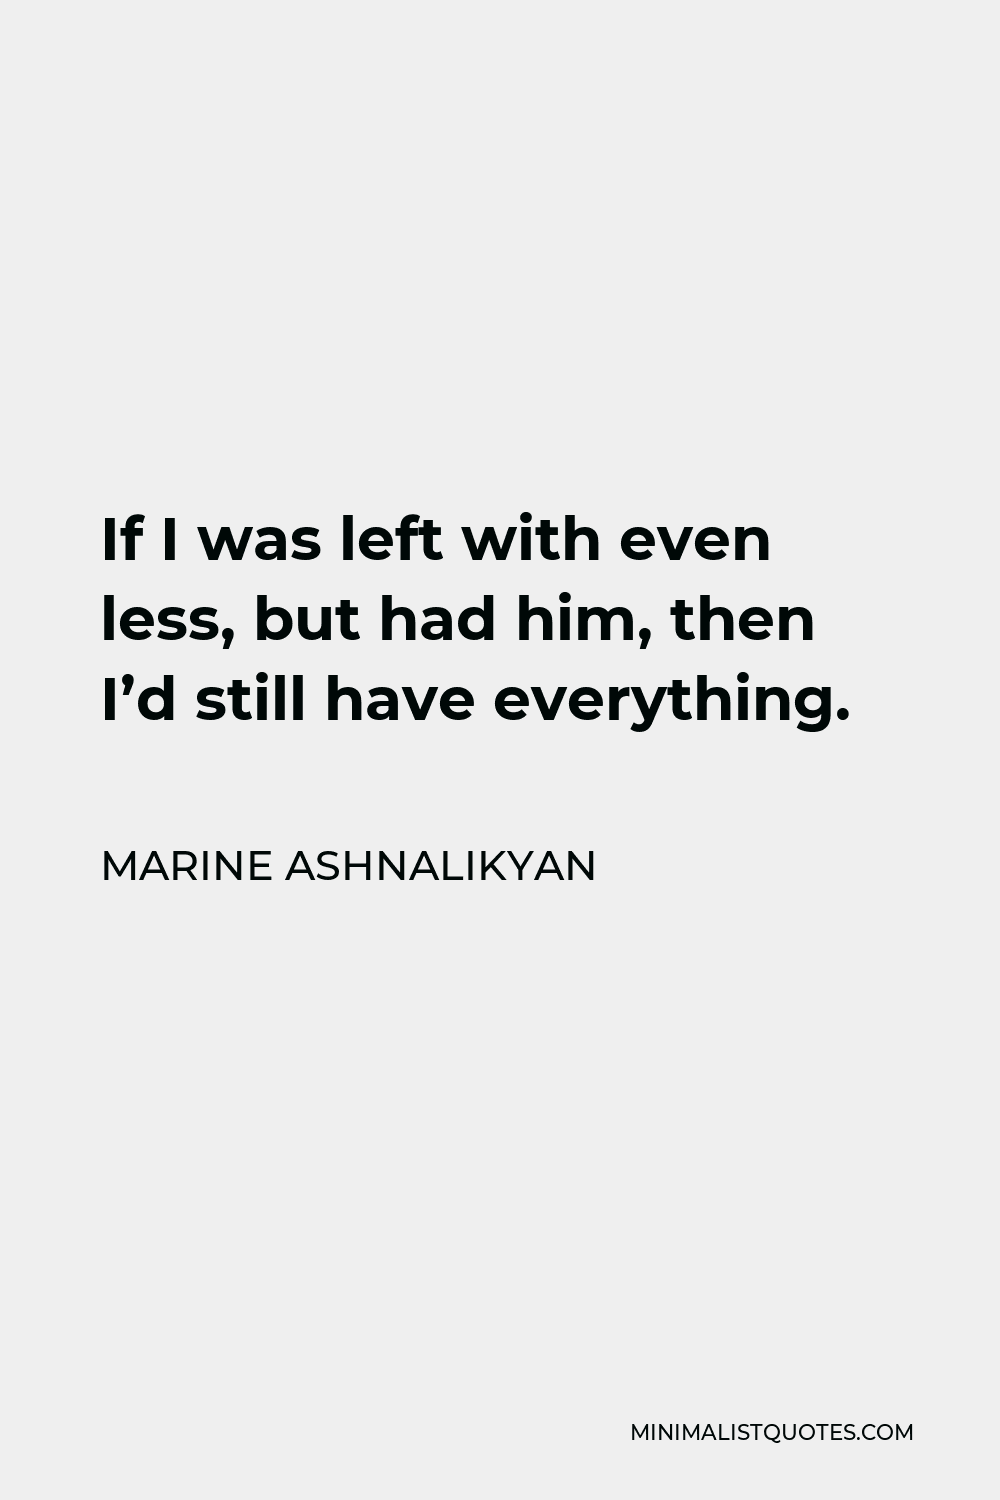 Marine Ashnalikyan Quote - If I was left with even less, but had him, then I’d still have everything.